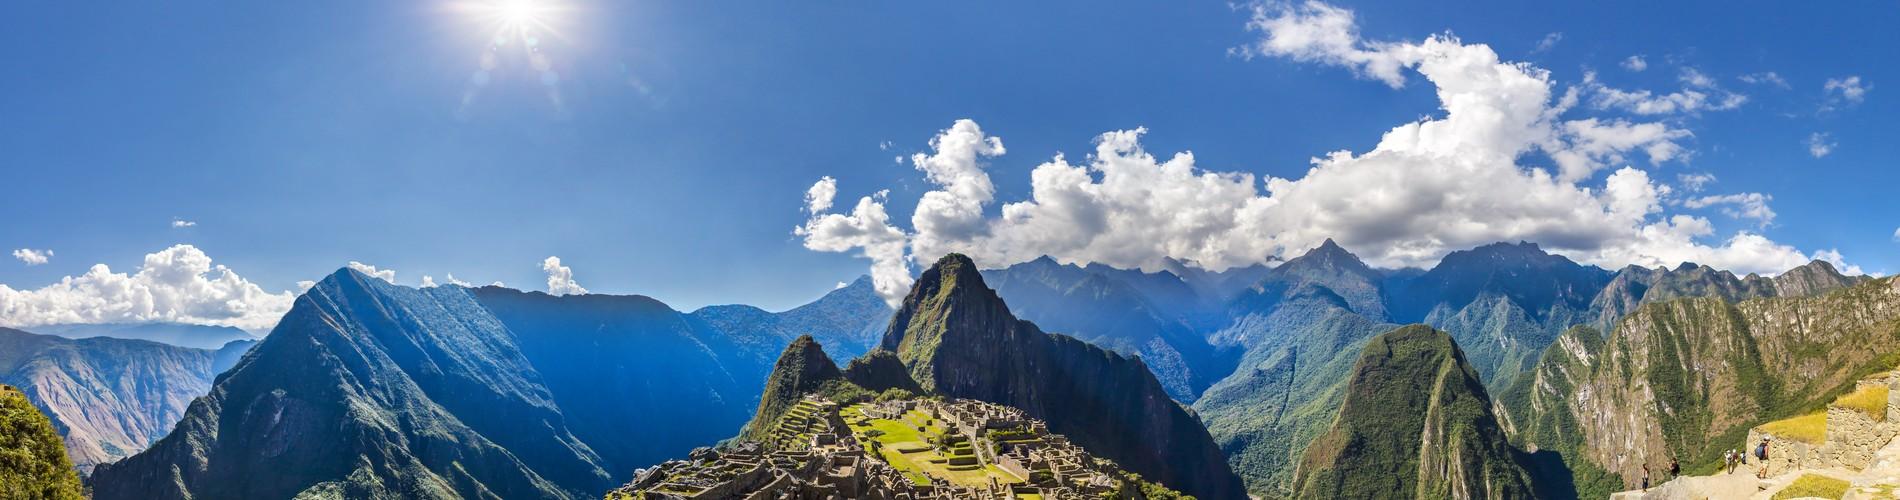 The 5-Day Moonstone Trek Through The Peruvian Andes